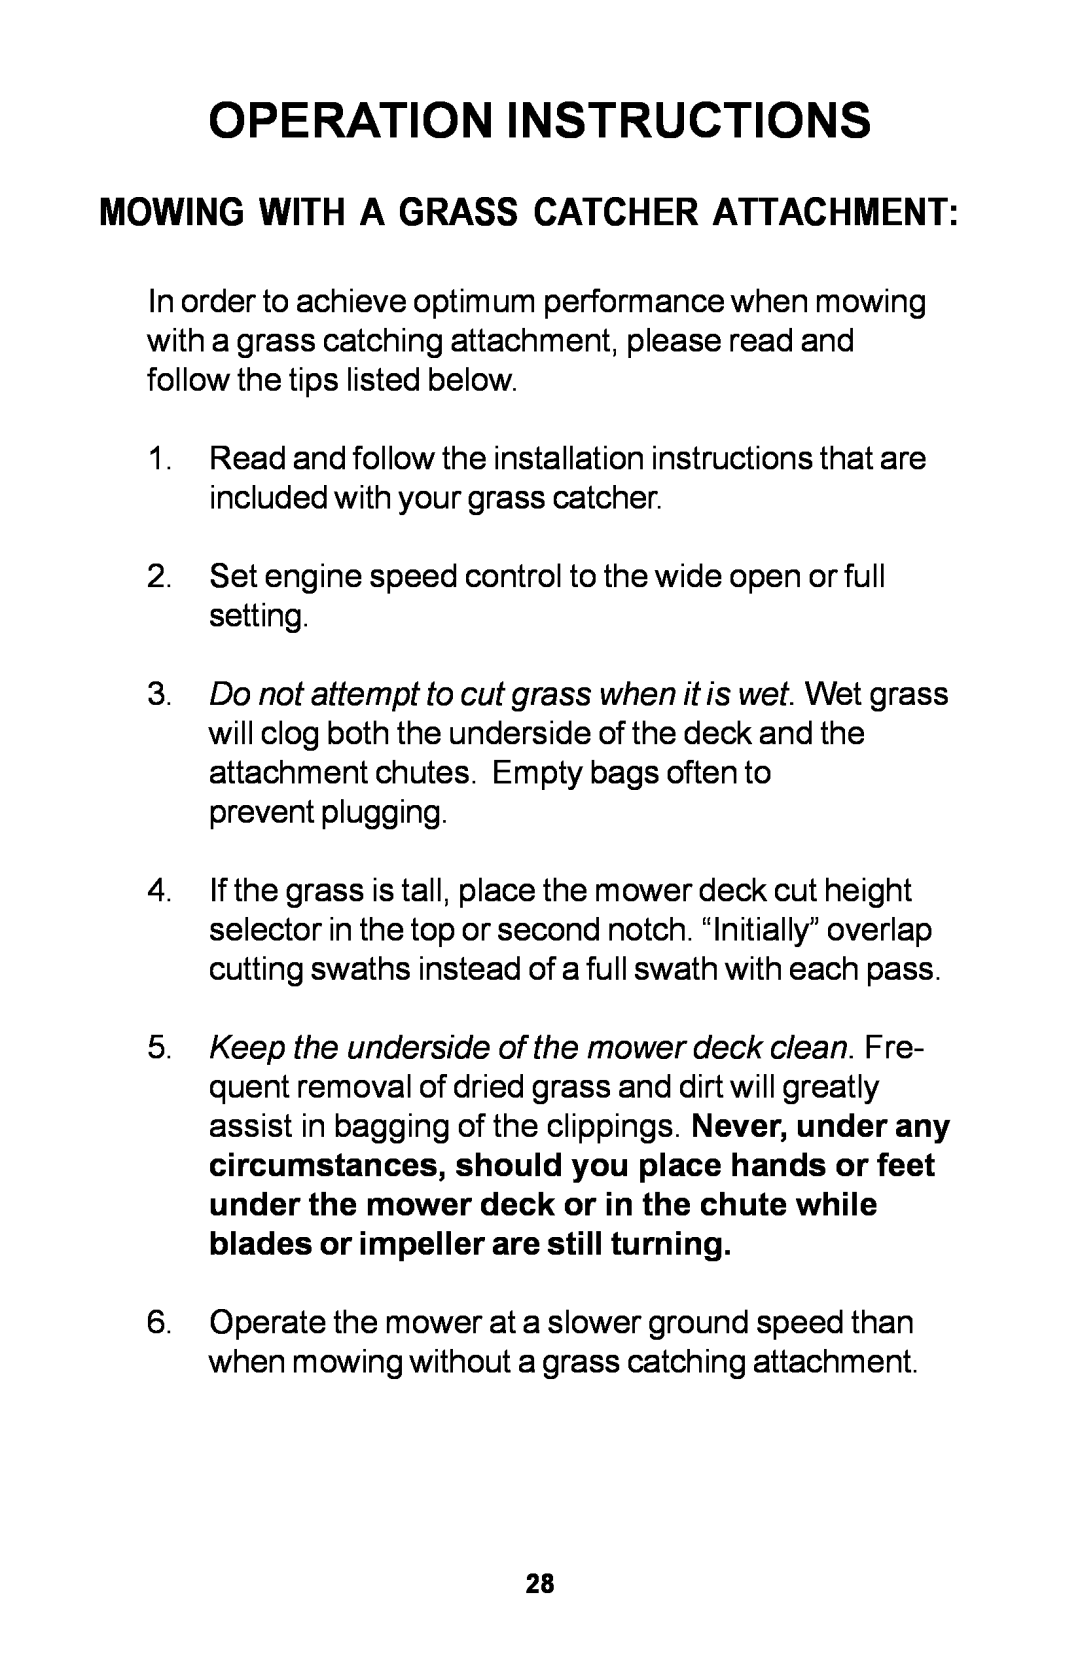 Dixon 30 manual Mowing With A Grass Catcher Attachment, Operation Instructions 